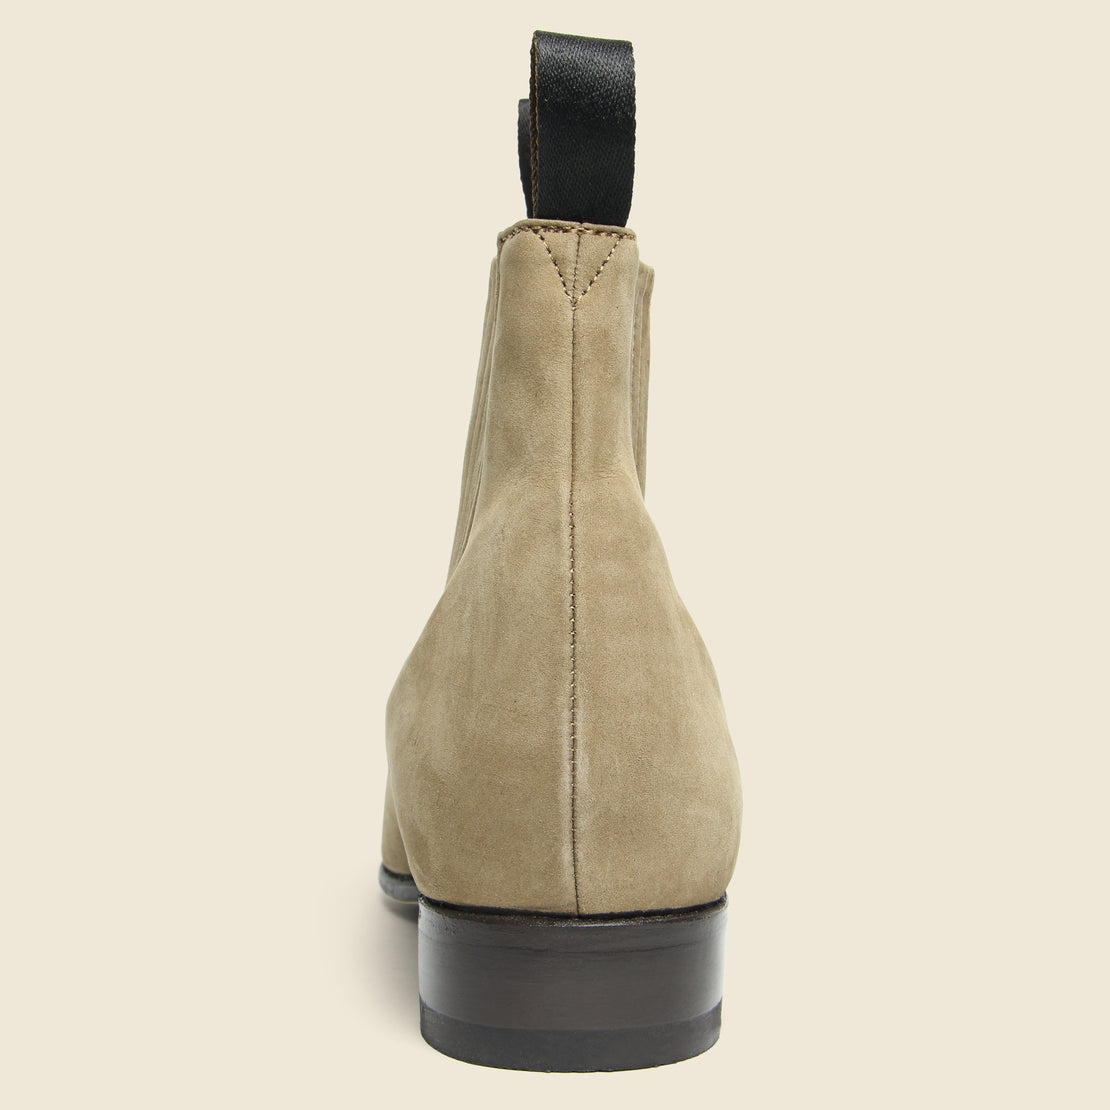 Botin Charro Chelsea Boot - Tan Suede - Chamula - STAG Provisions - W - Shoes - Boots